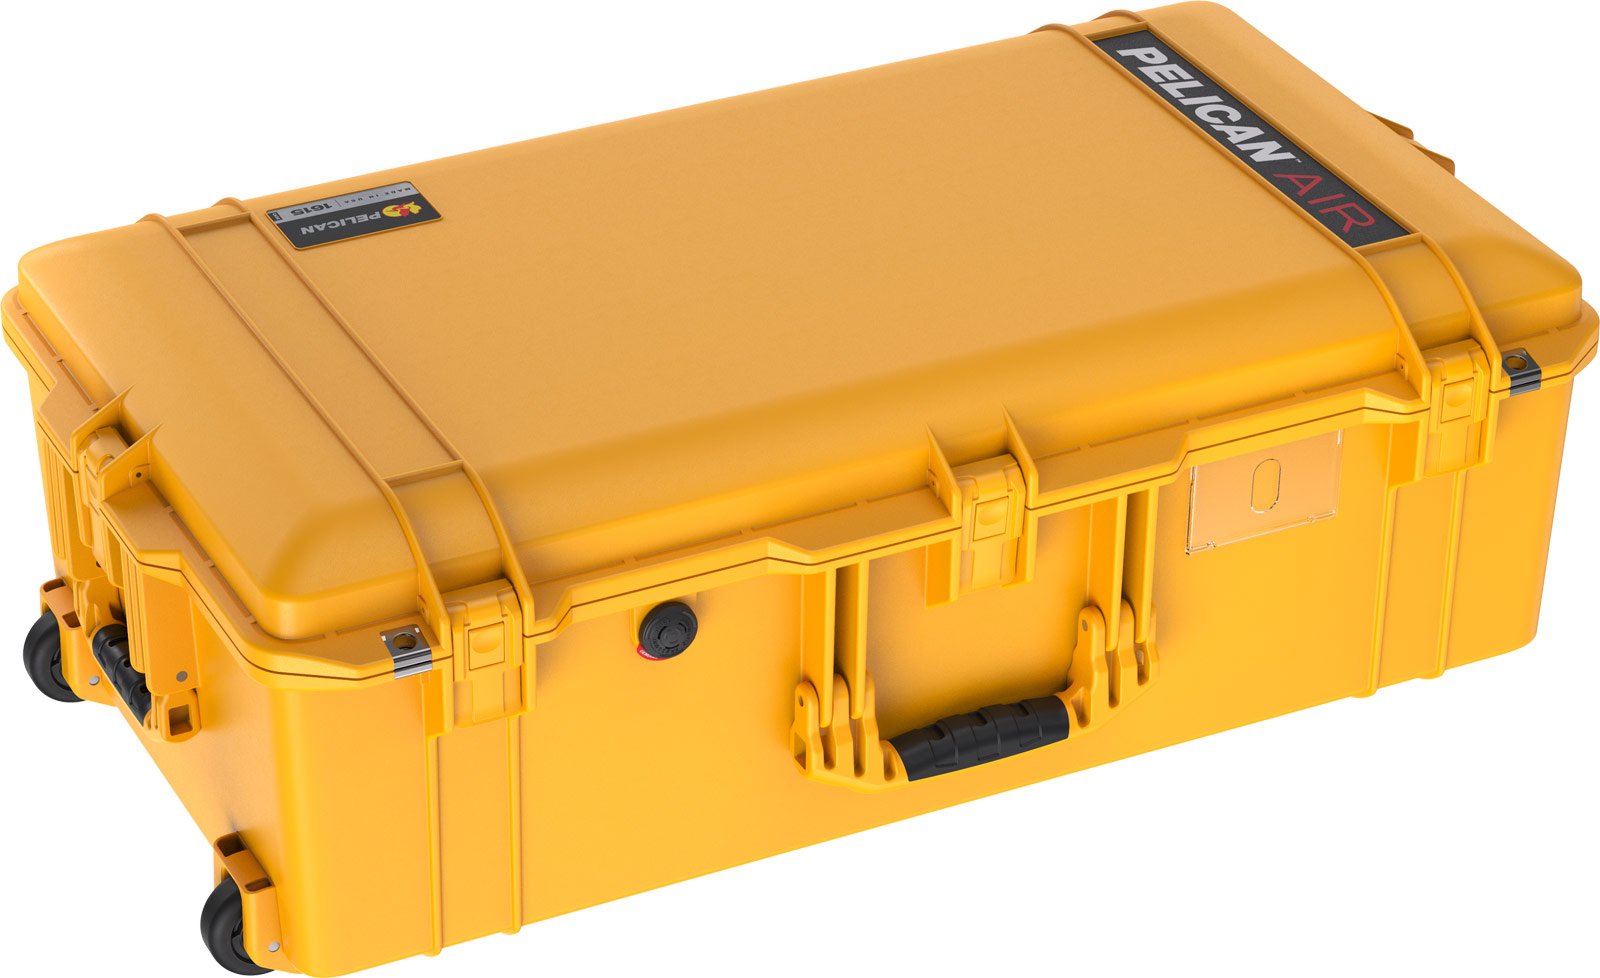 Pelican Protector Case 1615 Air Case - With Foam - Yellow